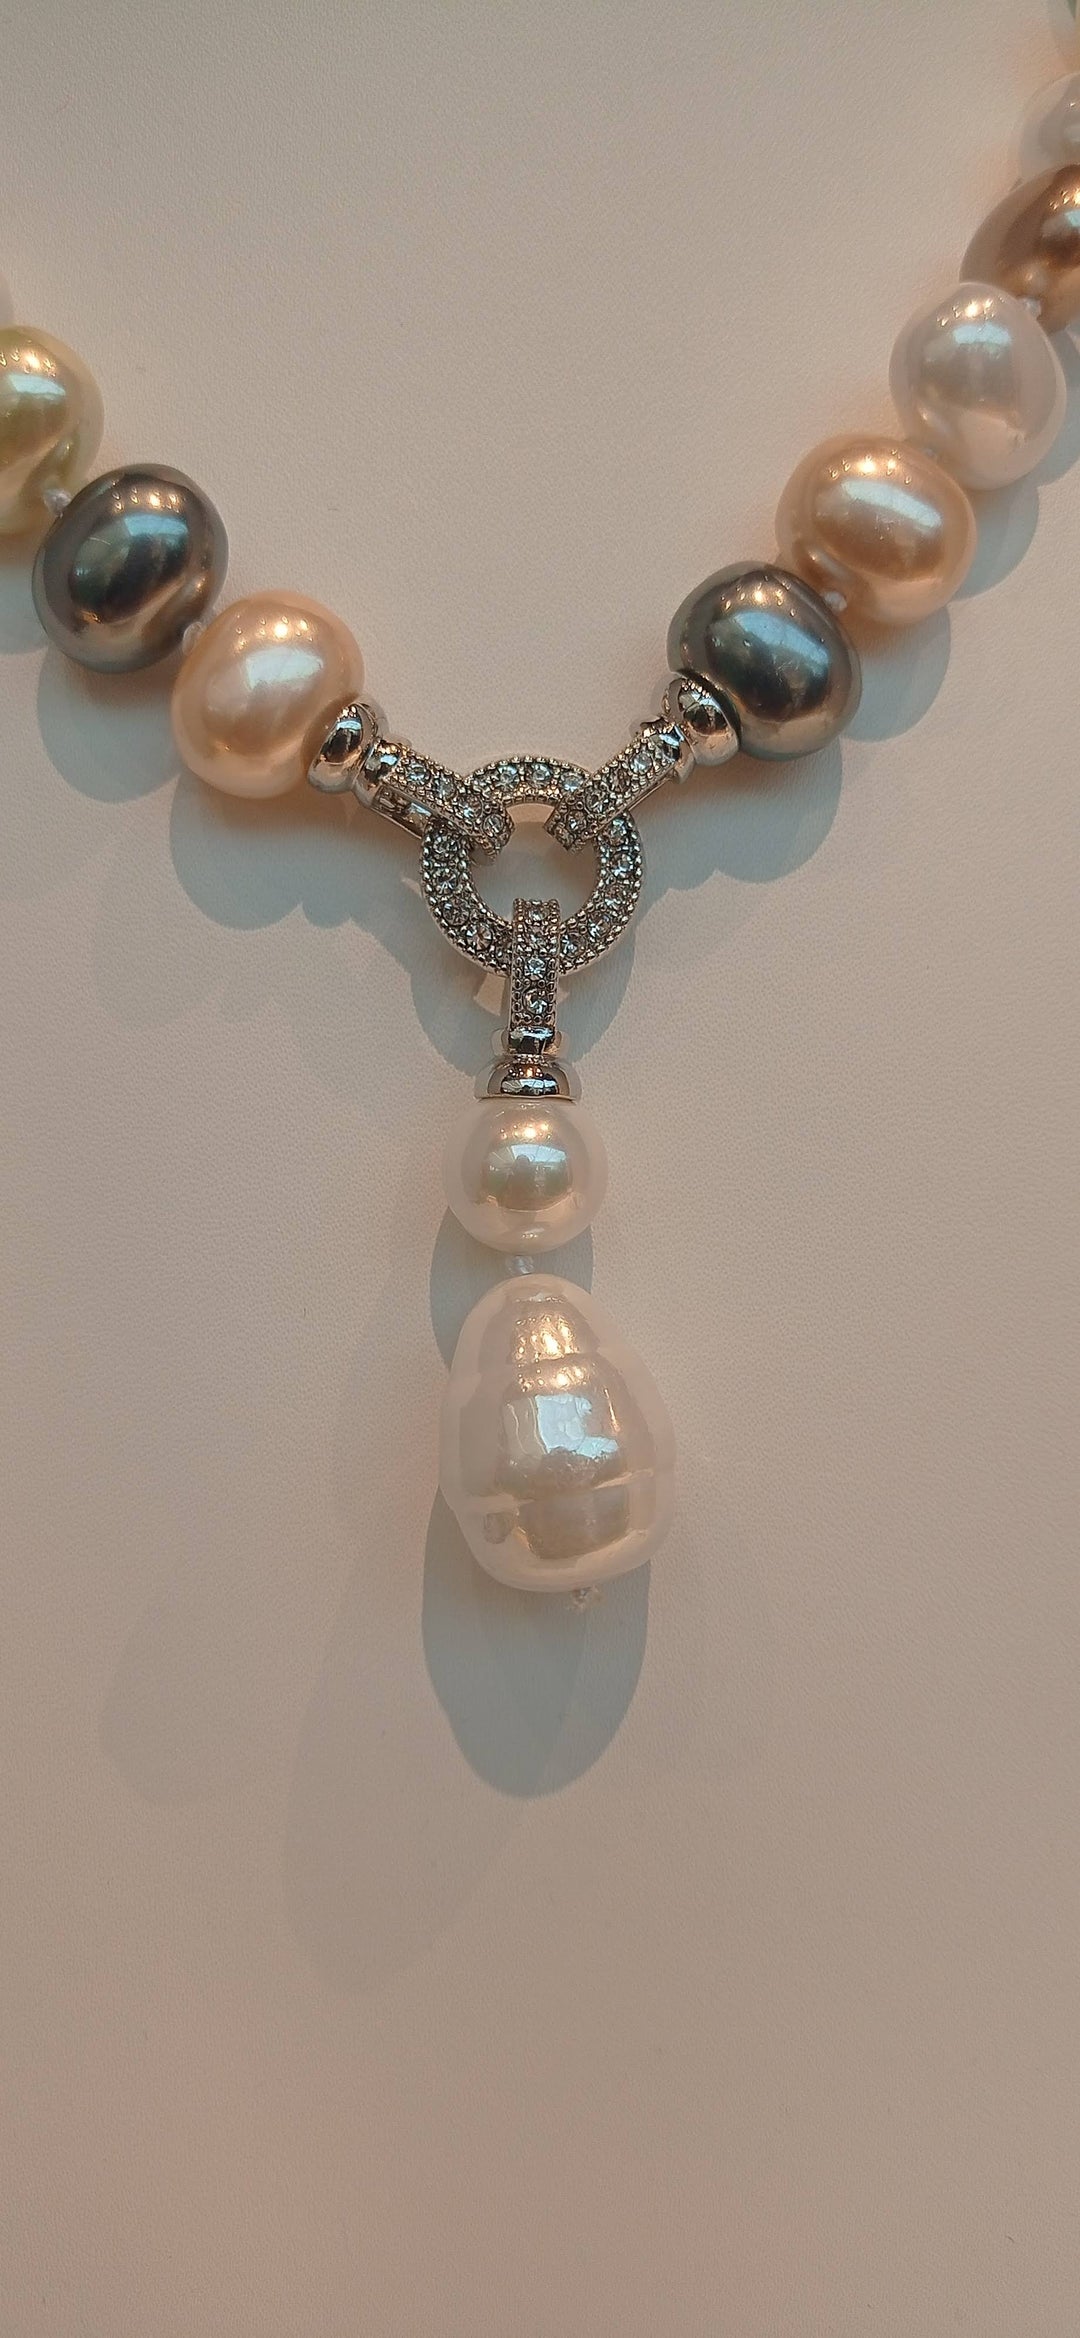 Anoushka Pearl Necklace with a Detachable Pearl Pendant